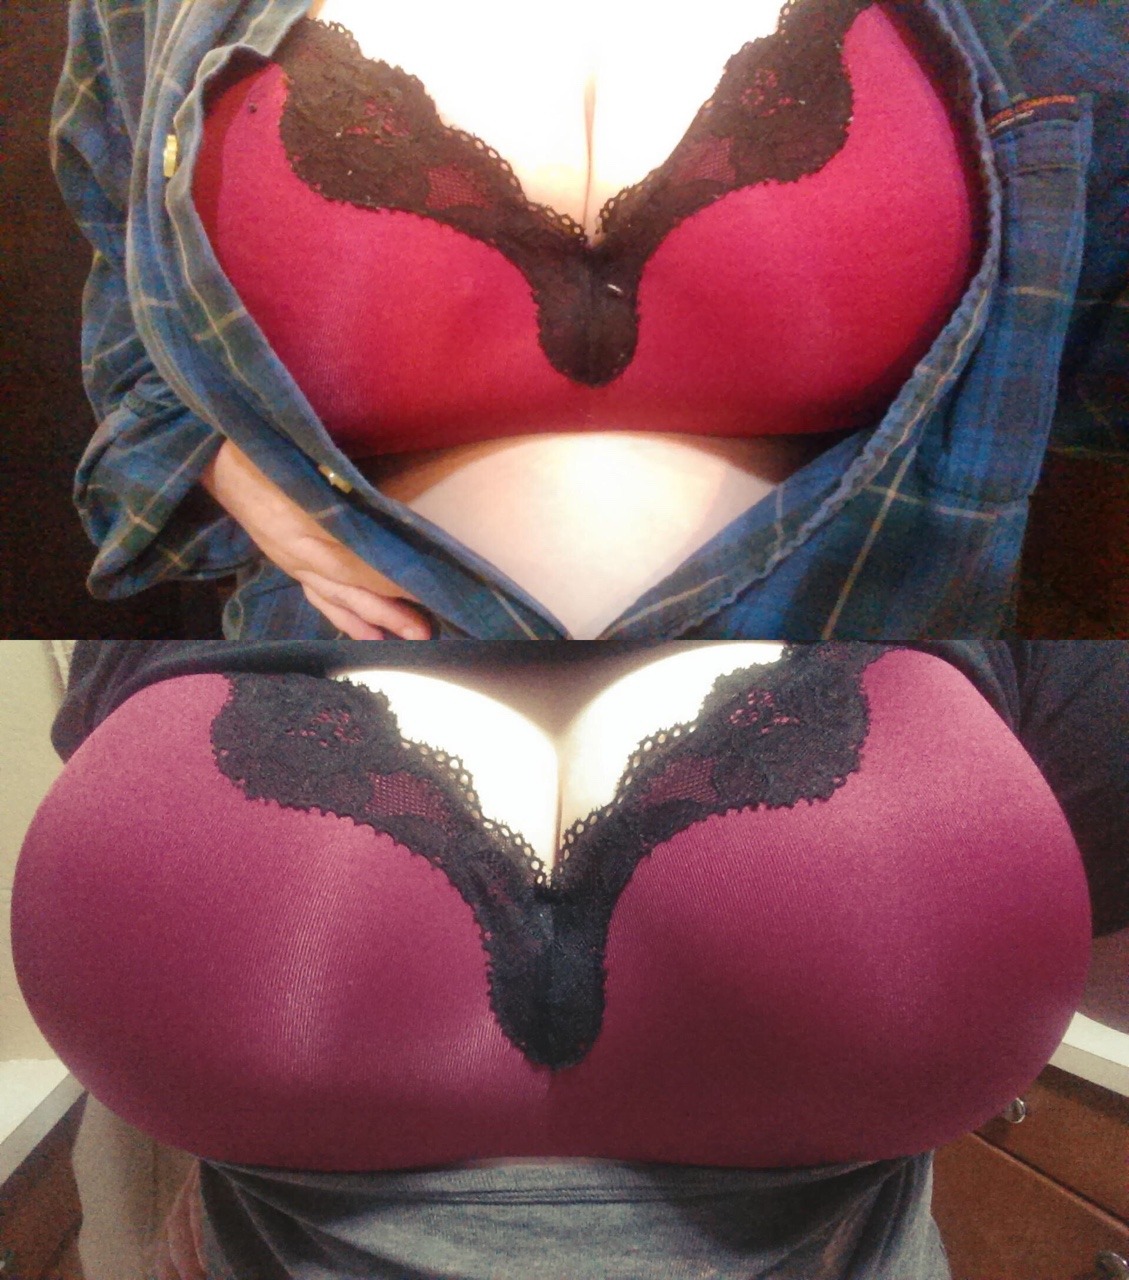 Submission by ScarfyMarbleÂ scarfymarble started using natural breast enhancement